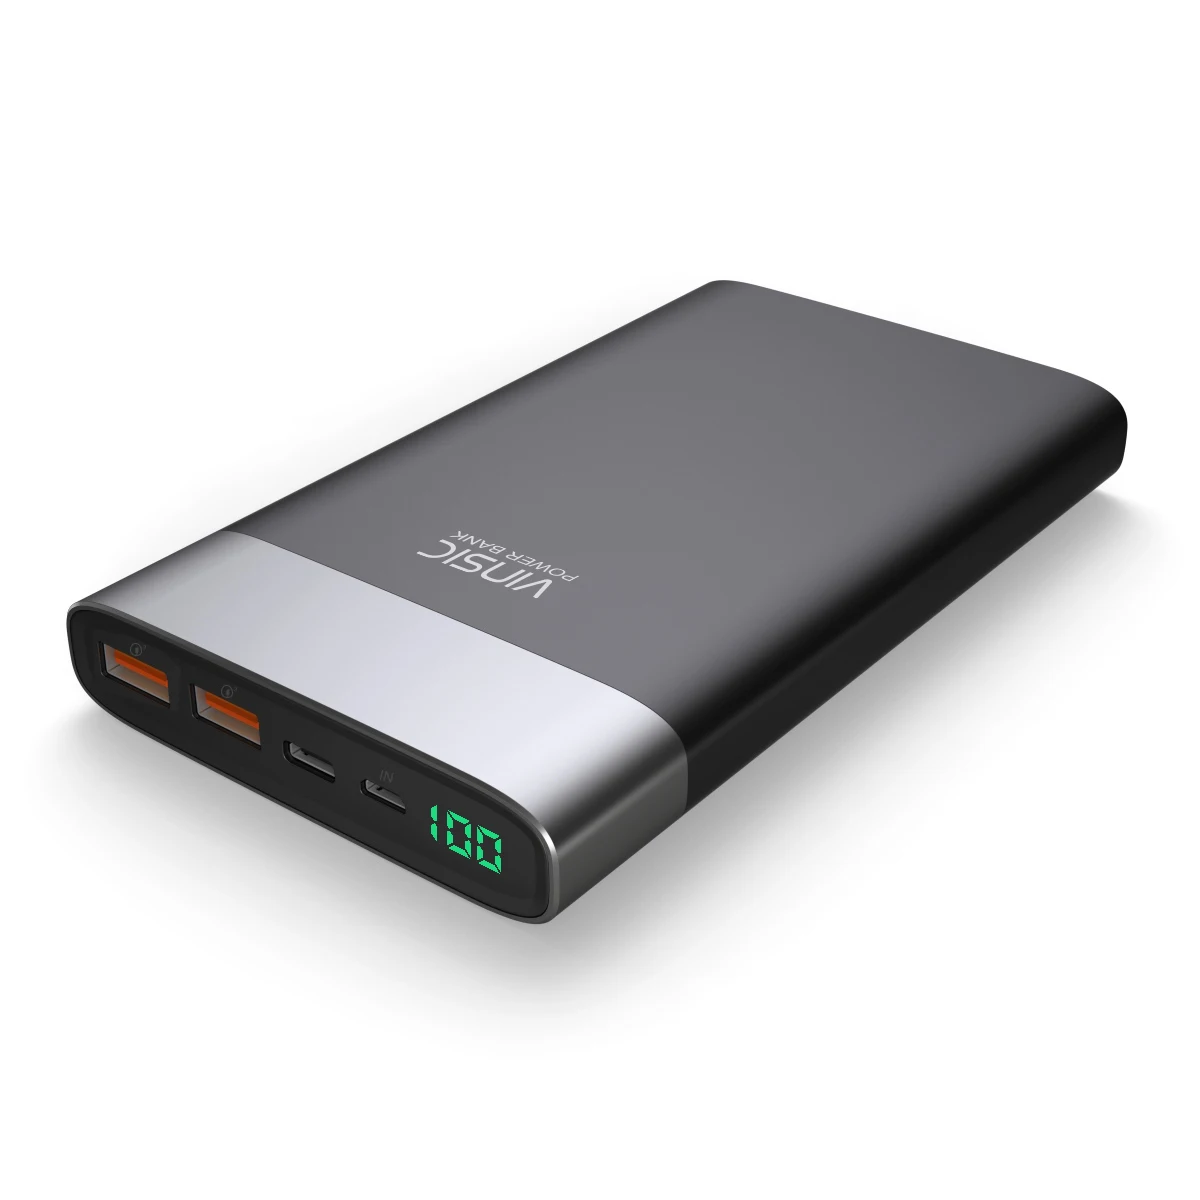 

Worldwide brand Vinsic type c USB-c 20000mah quick charge power bank with much better quality and design than Anker power bank